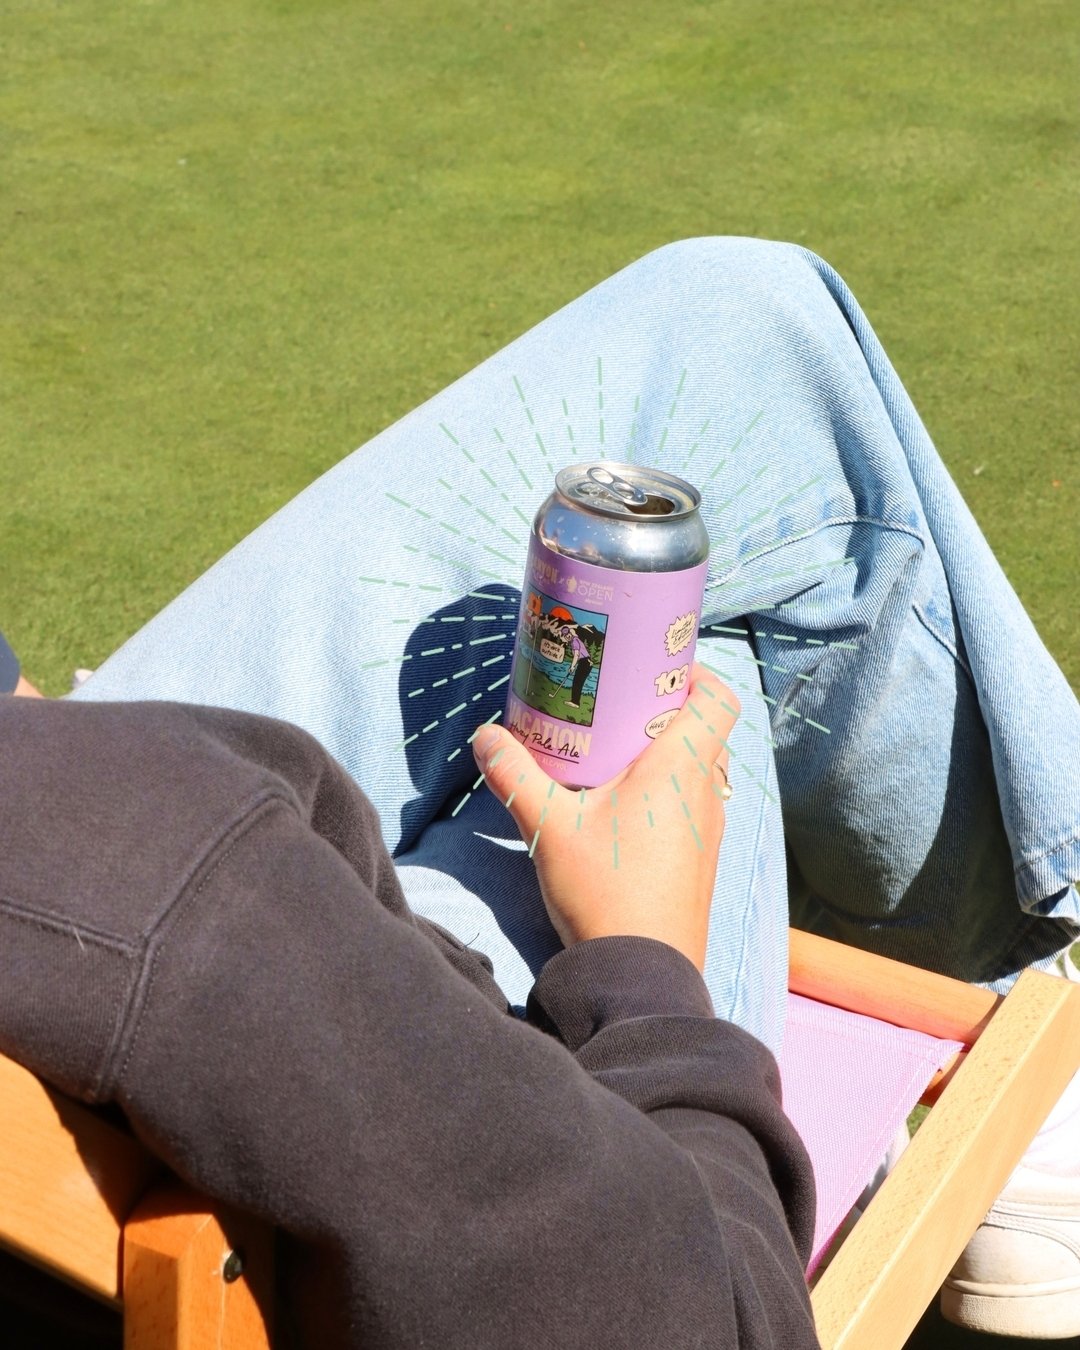 Want to relive the feeling of knocking back a cold one on a sunbathed afternoon at the NZ Open?

We know we're looking back with fond memories of watching great putts with a hazy in hand ⛳️🏌🏼&zwj;♂️

A few of our limited edition NZ Open Hazy Pale A